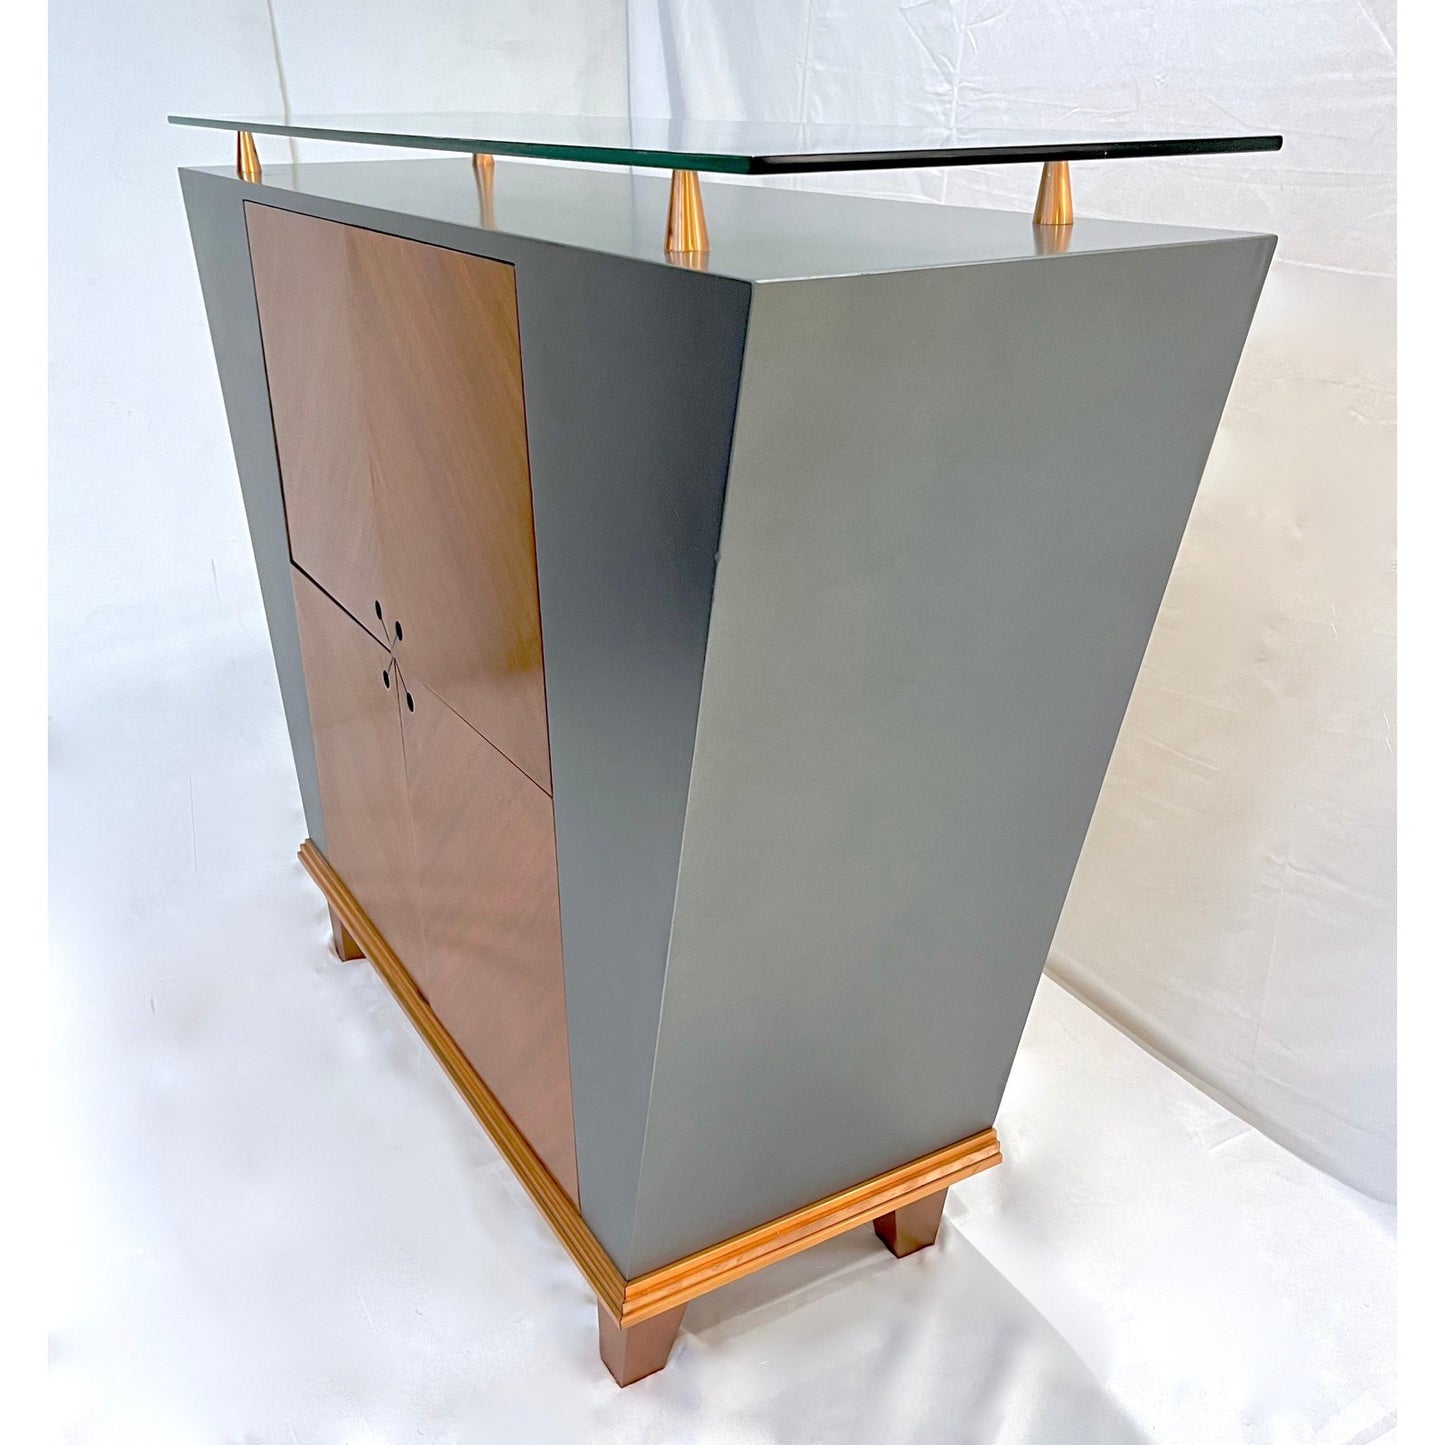 Italian Mid-Century Modern Pair of Copper & Grey Lacquer Sideboards by Pallucco